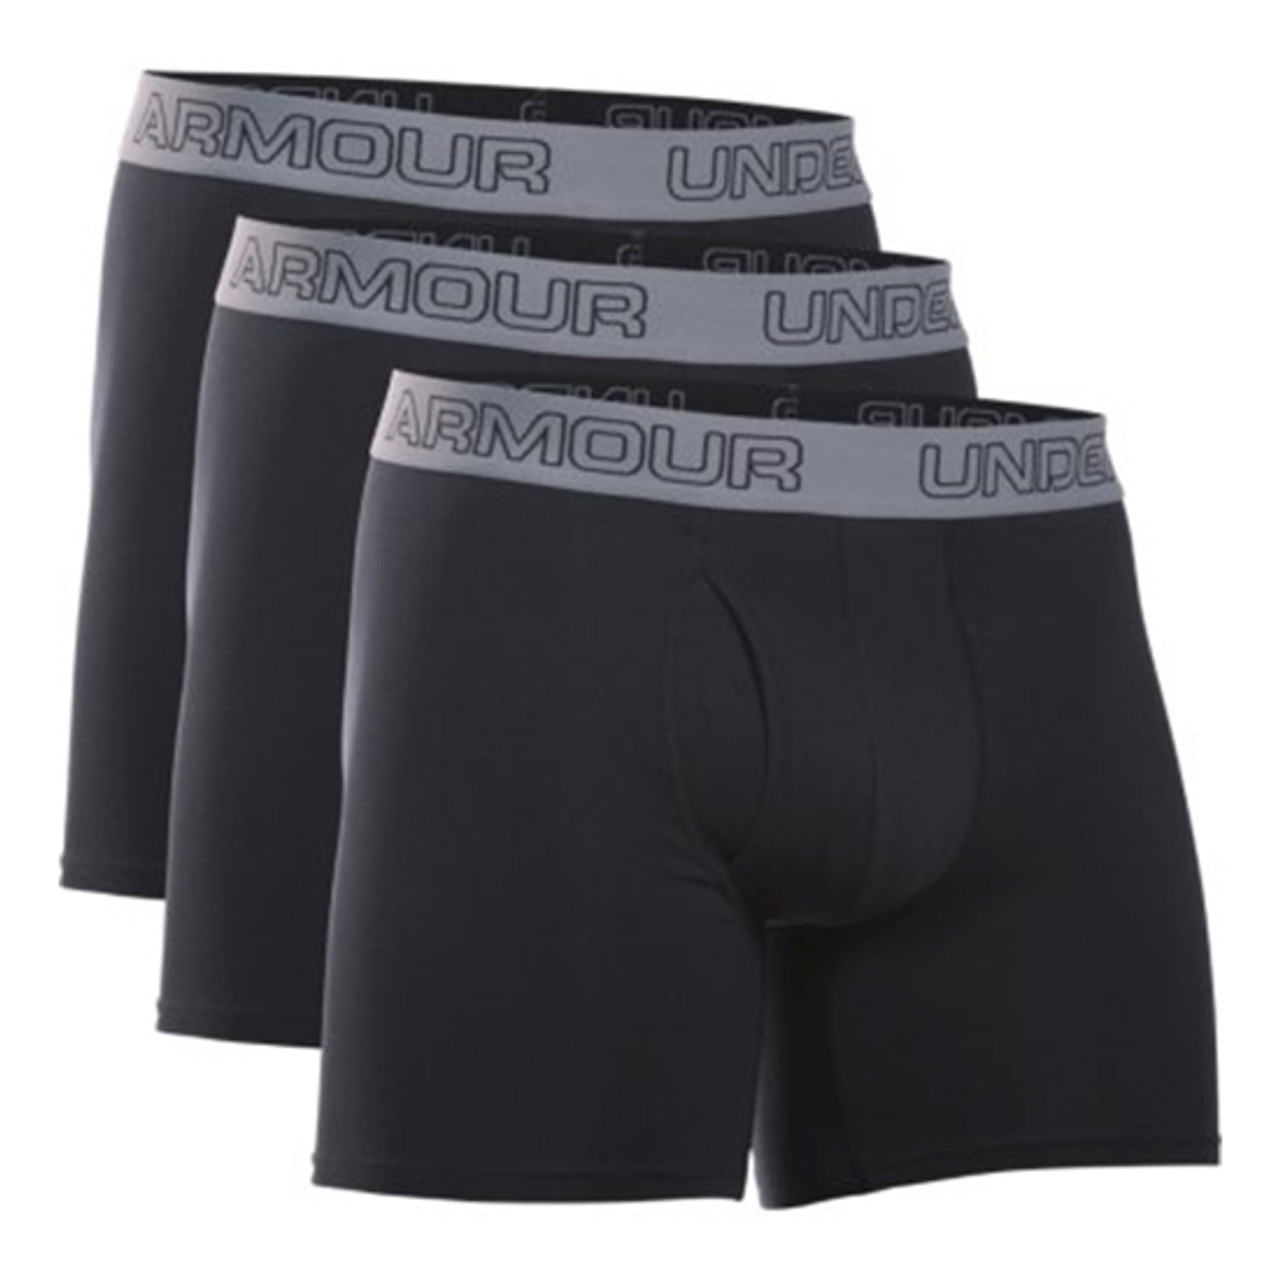 Under Armour Charged Cotton Men's Boxer Briefs XXL Black/Gray 3 Pack  [FC-20-1277279] - Cheaper Than Dirt